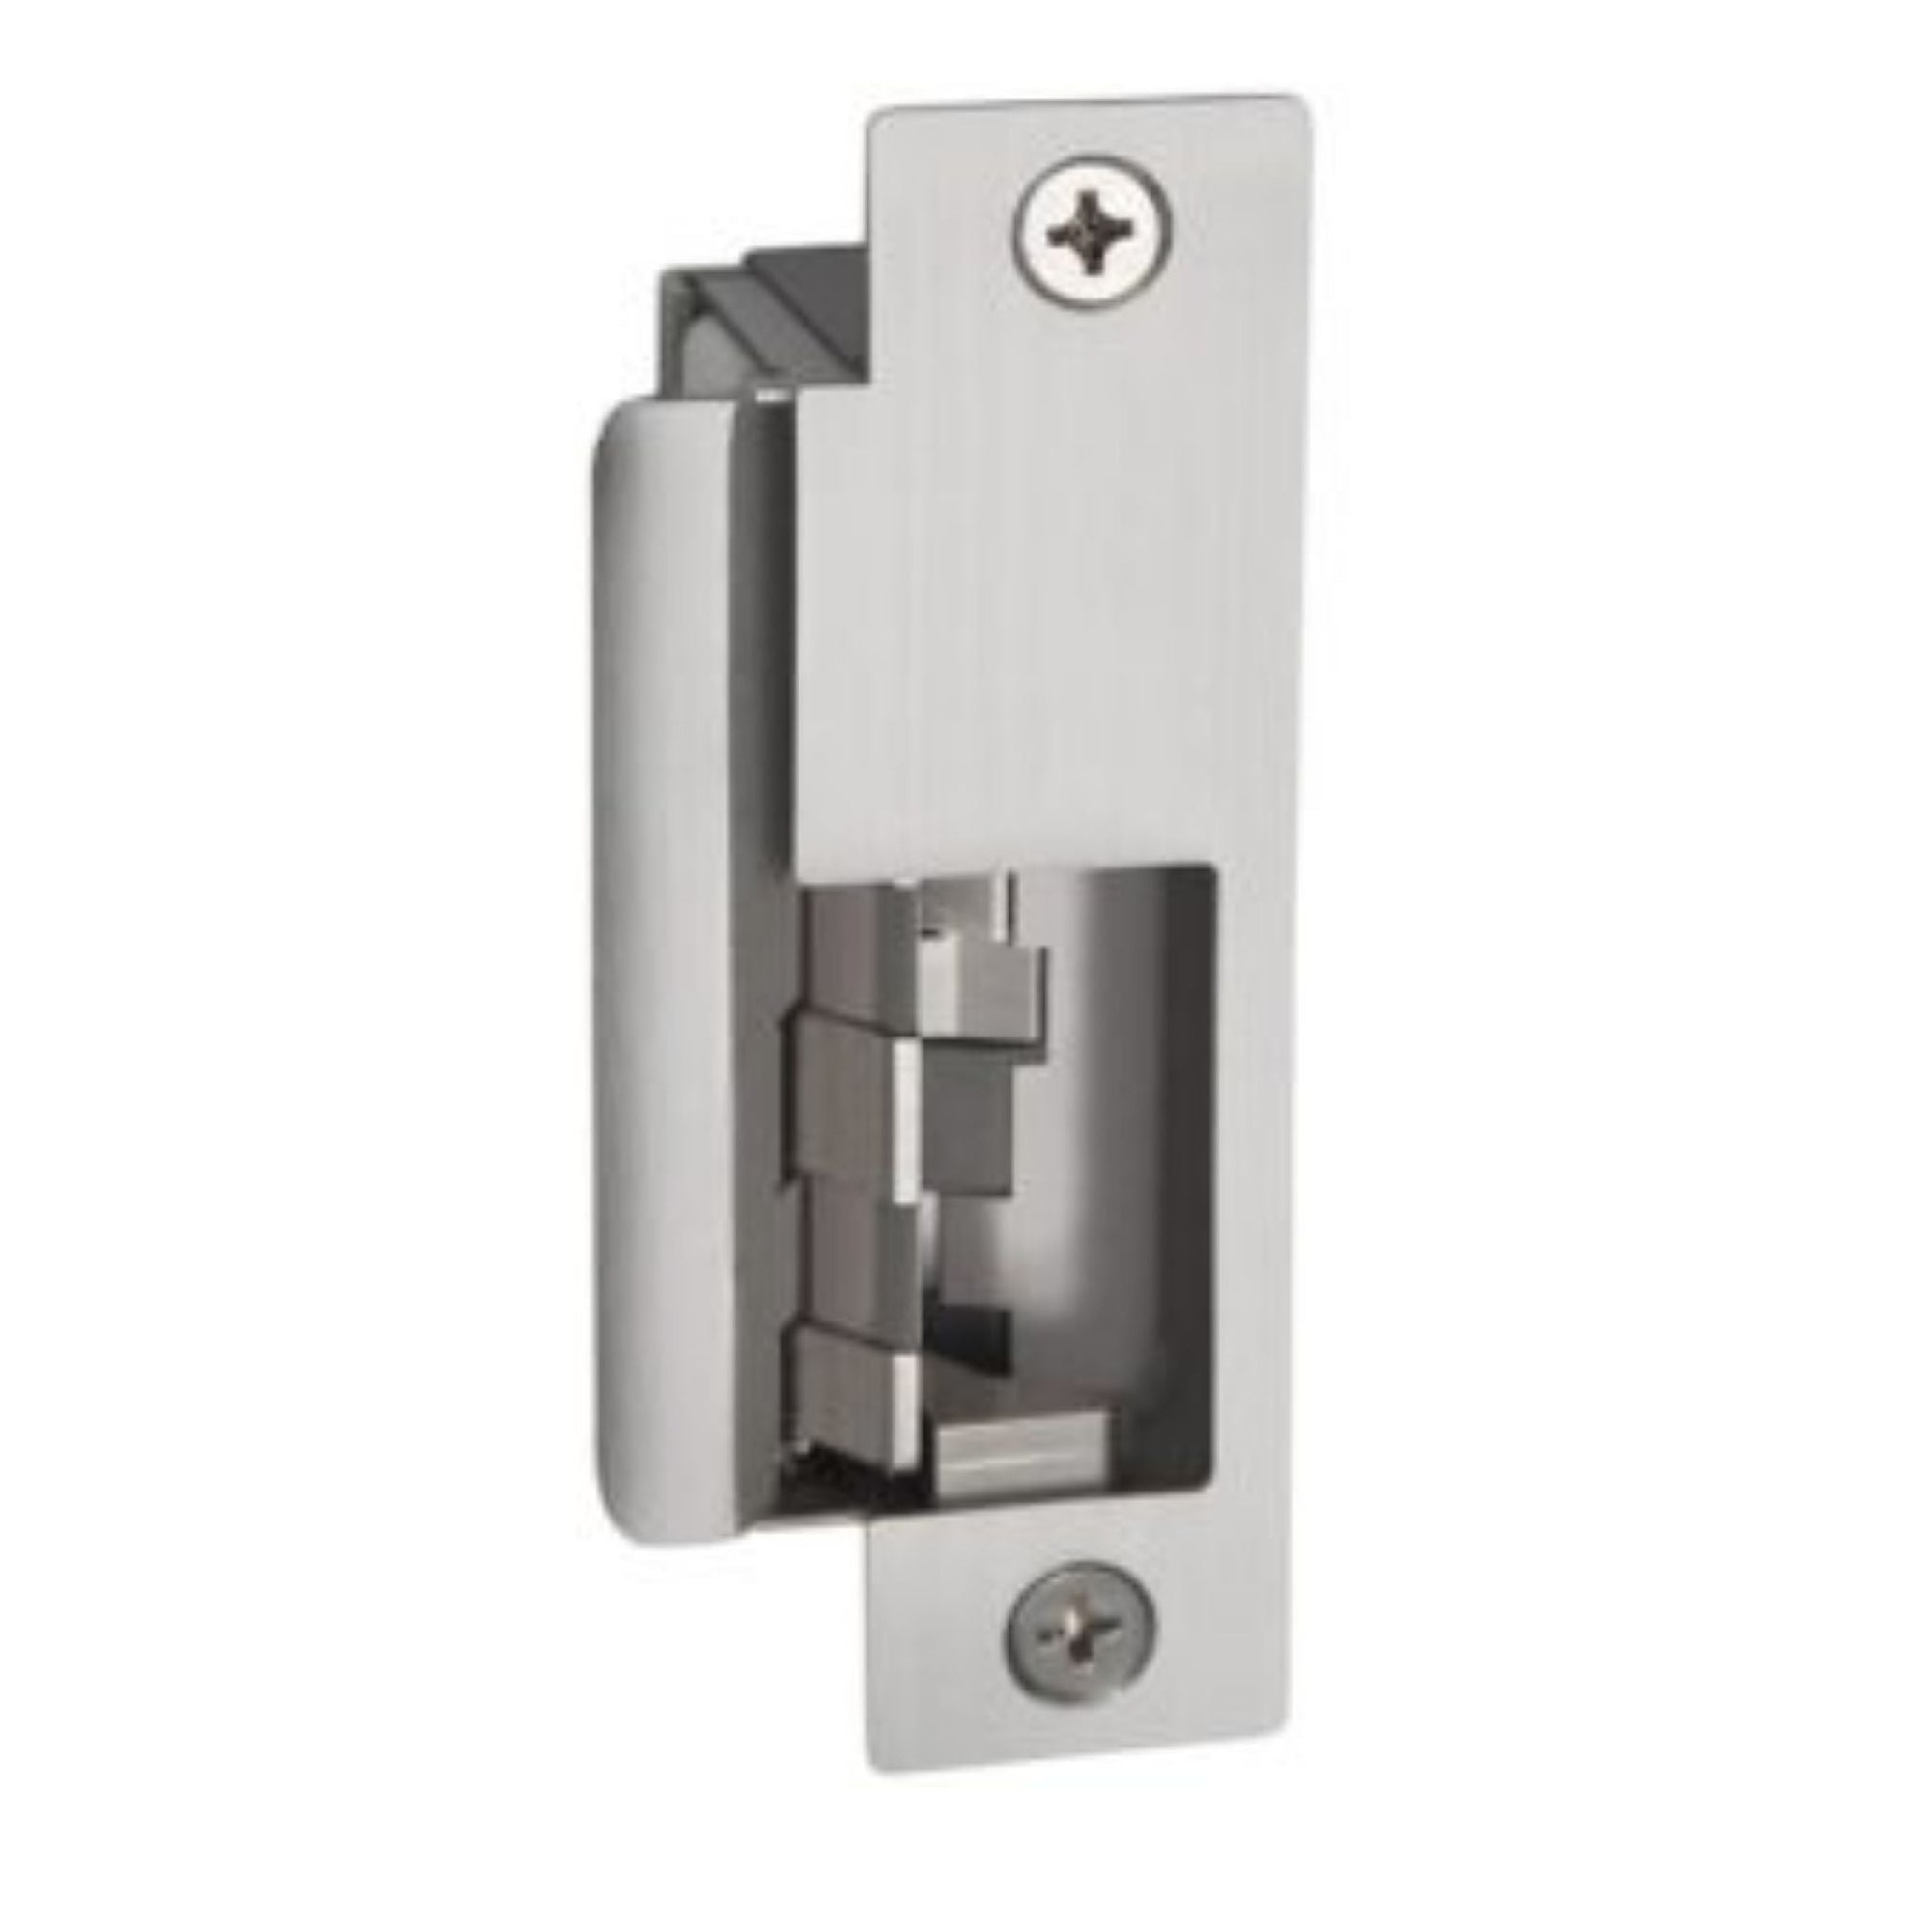 HES 8500 Series Fire Rated Concealed Electric Strike for Mortise Locks Without Deadbolts Up to 3/4" Latchbolts Available with Latchbolt Monitor (LBM) and Latchbolt Strike Monitor (LBSM) - The Lock Source